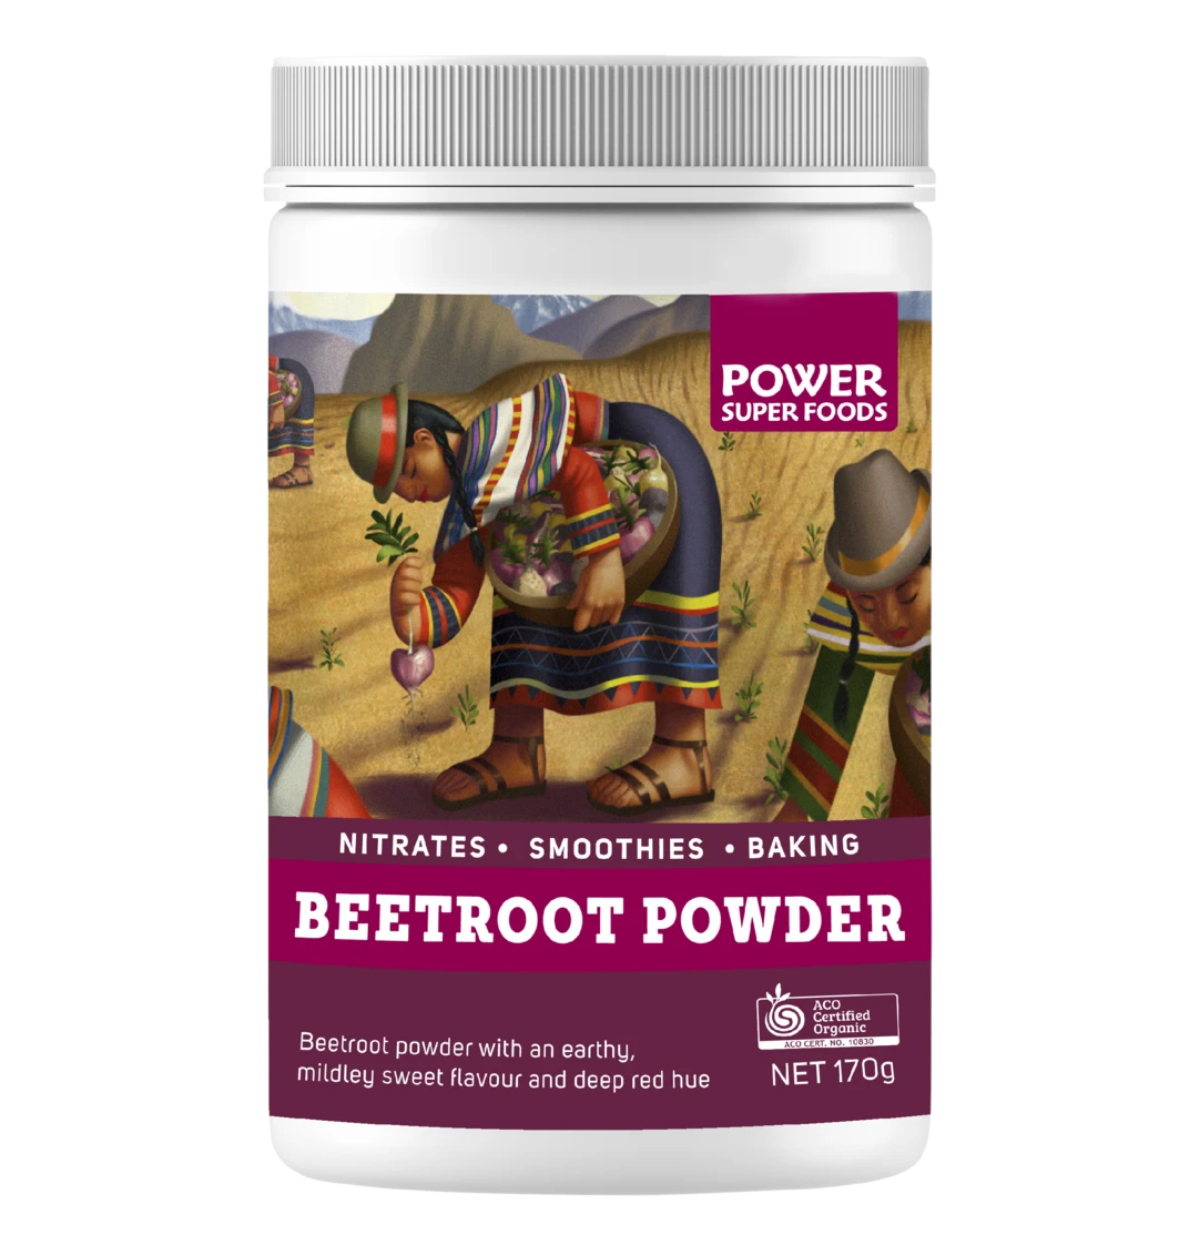 RN RERII SUPER FOODS iPOWER NITRATES SMOOTHIES BAKING BEETROOT POWDER Beetroot powder with an earthy, mildley sweet flavour and LT TG T 